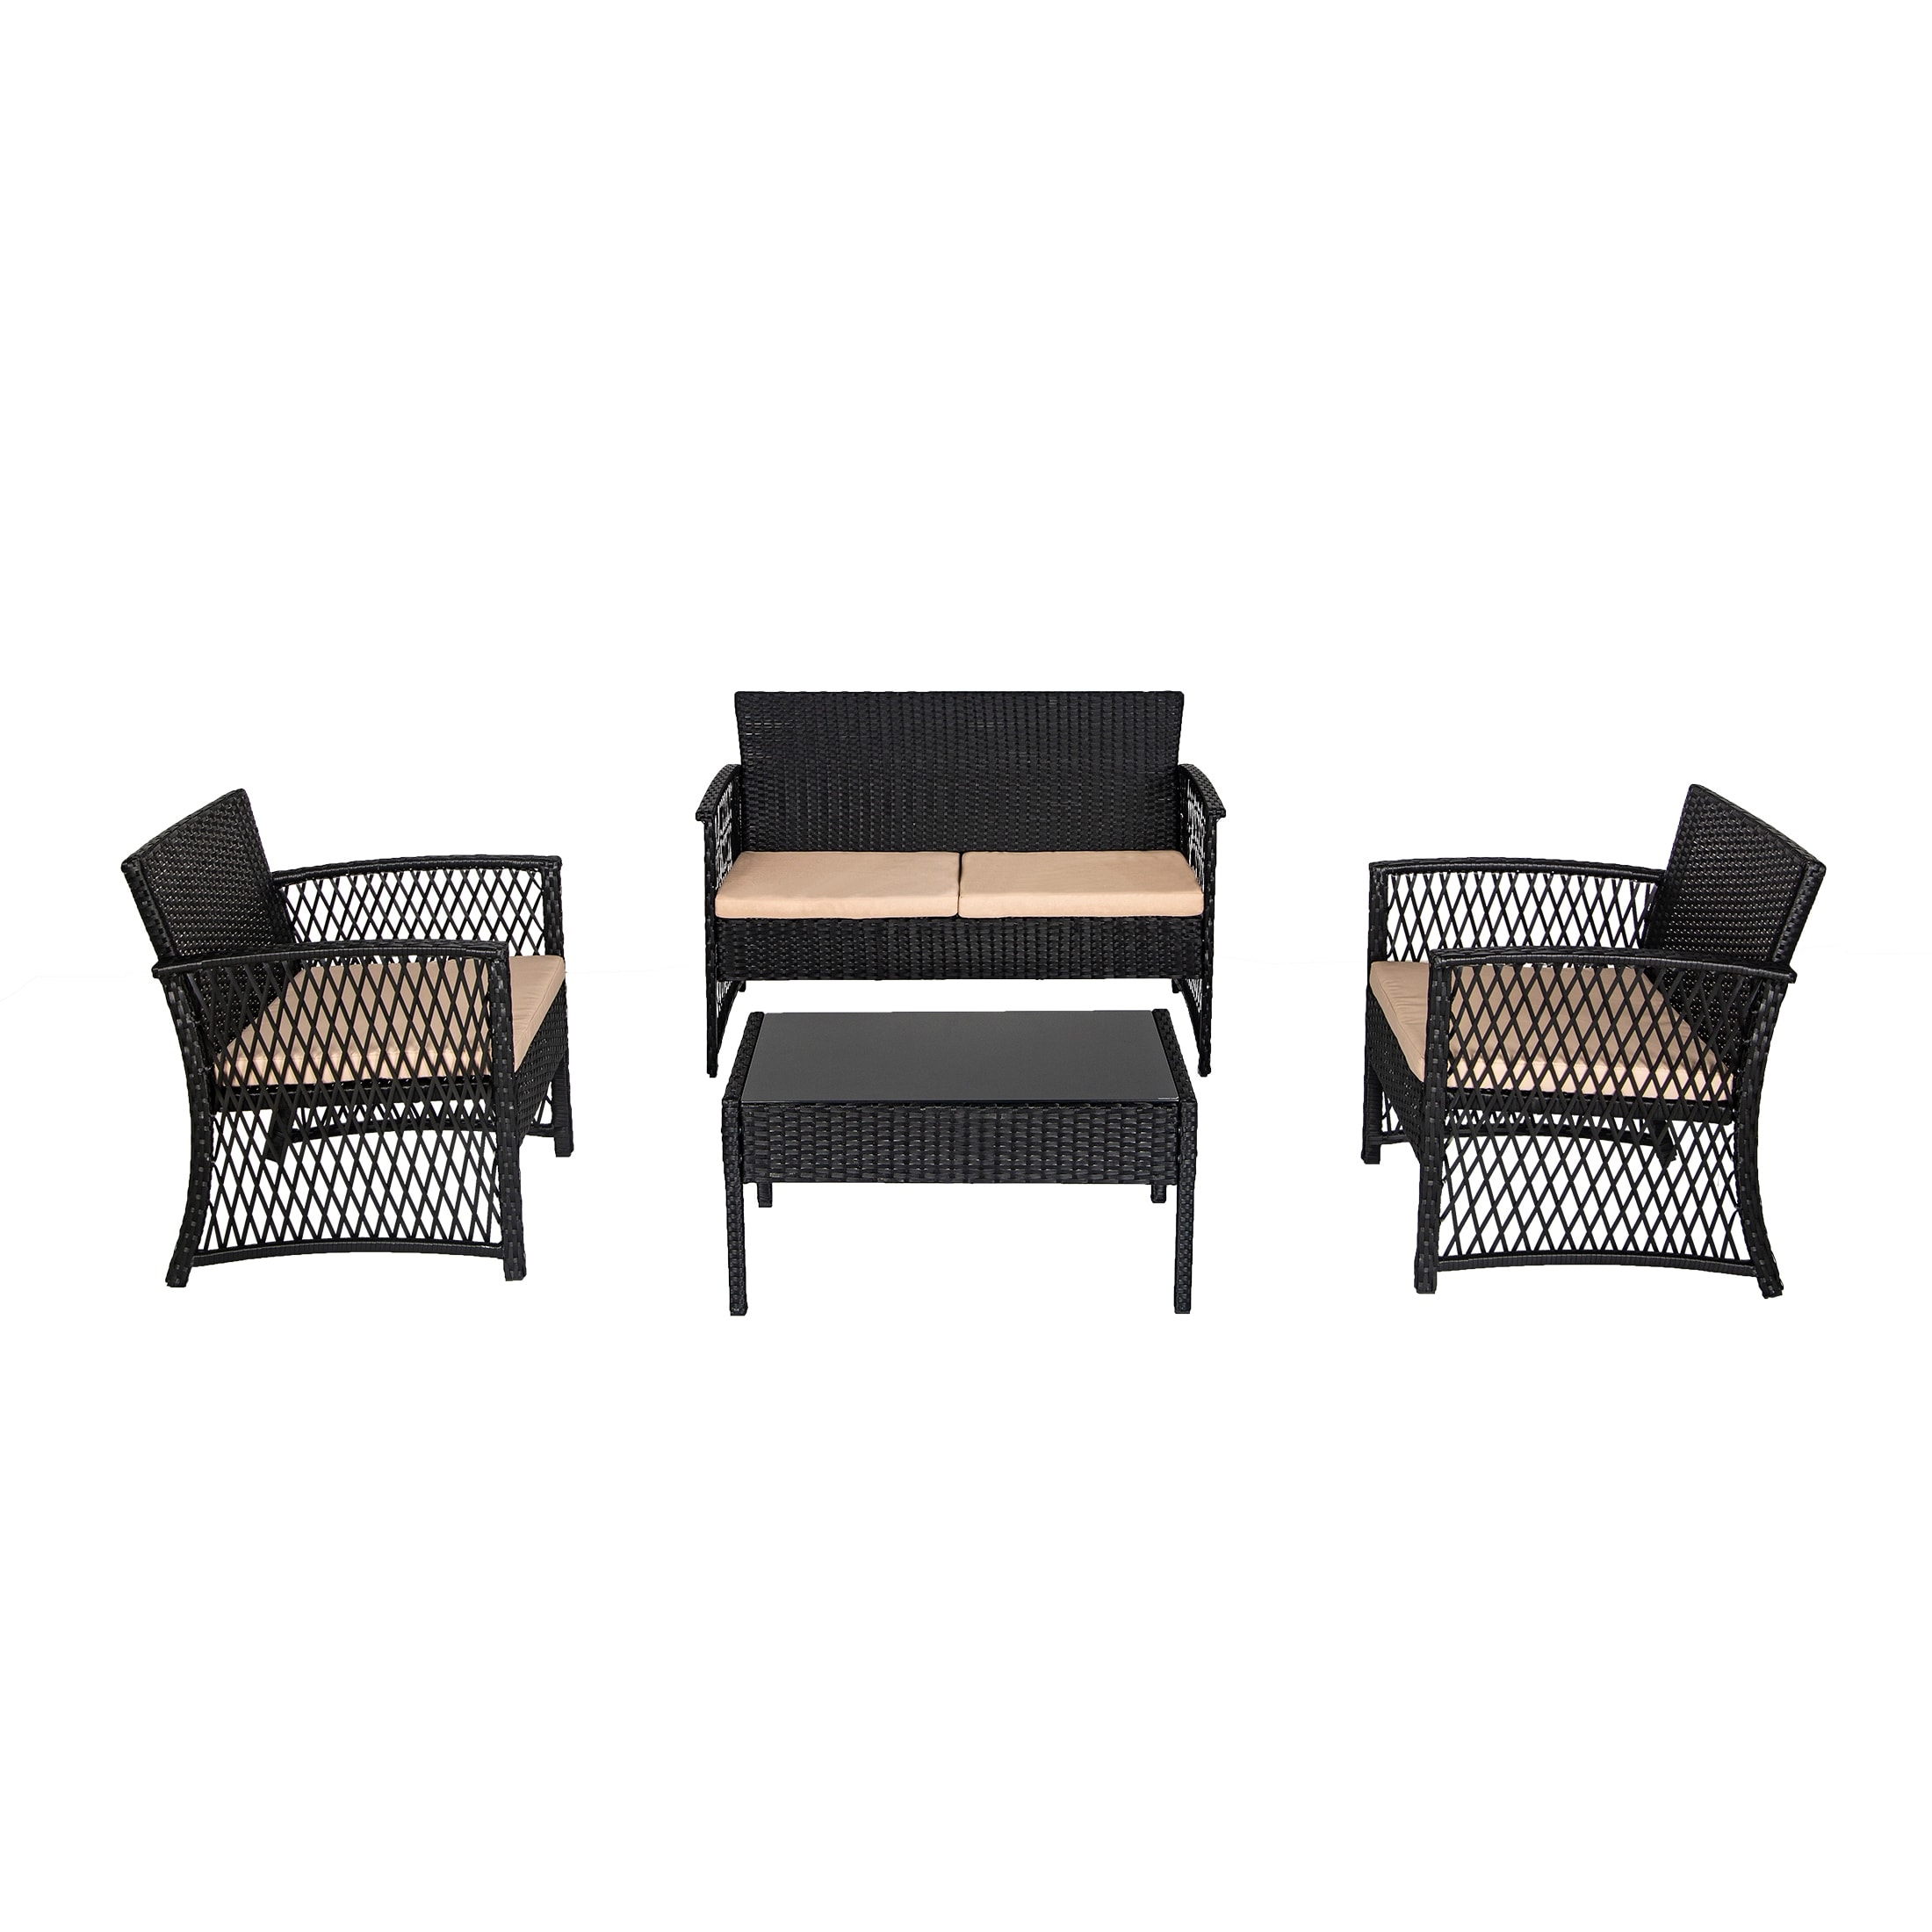 Madison Outdoor 4-piece Rattan Patio Furniture Chat Set